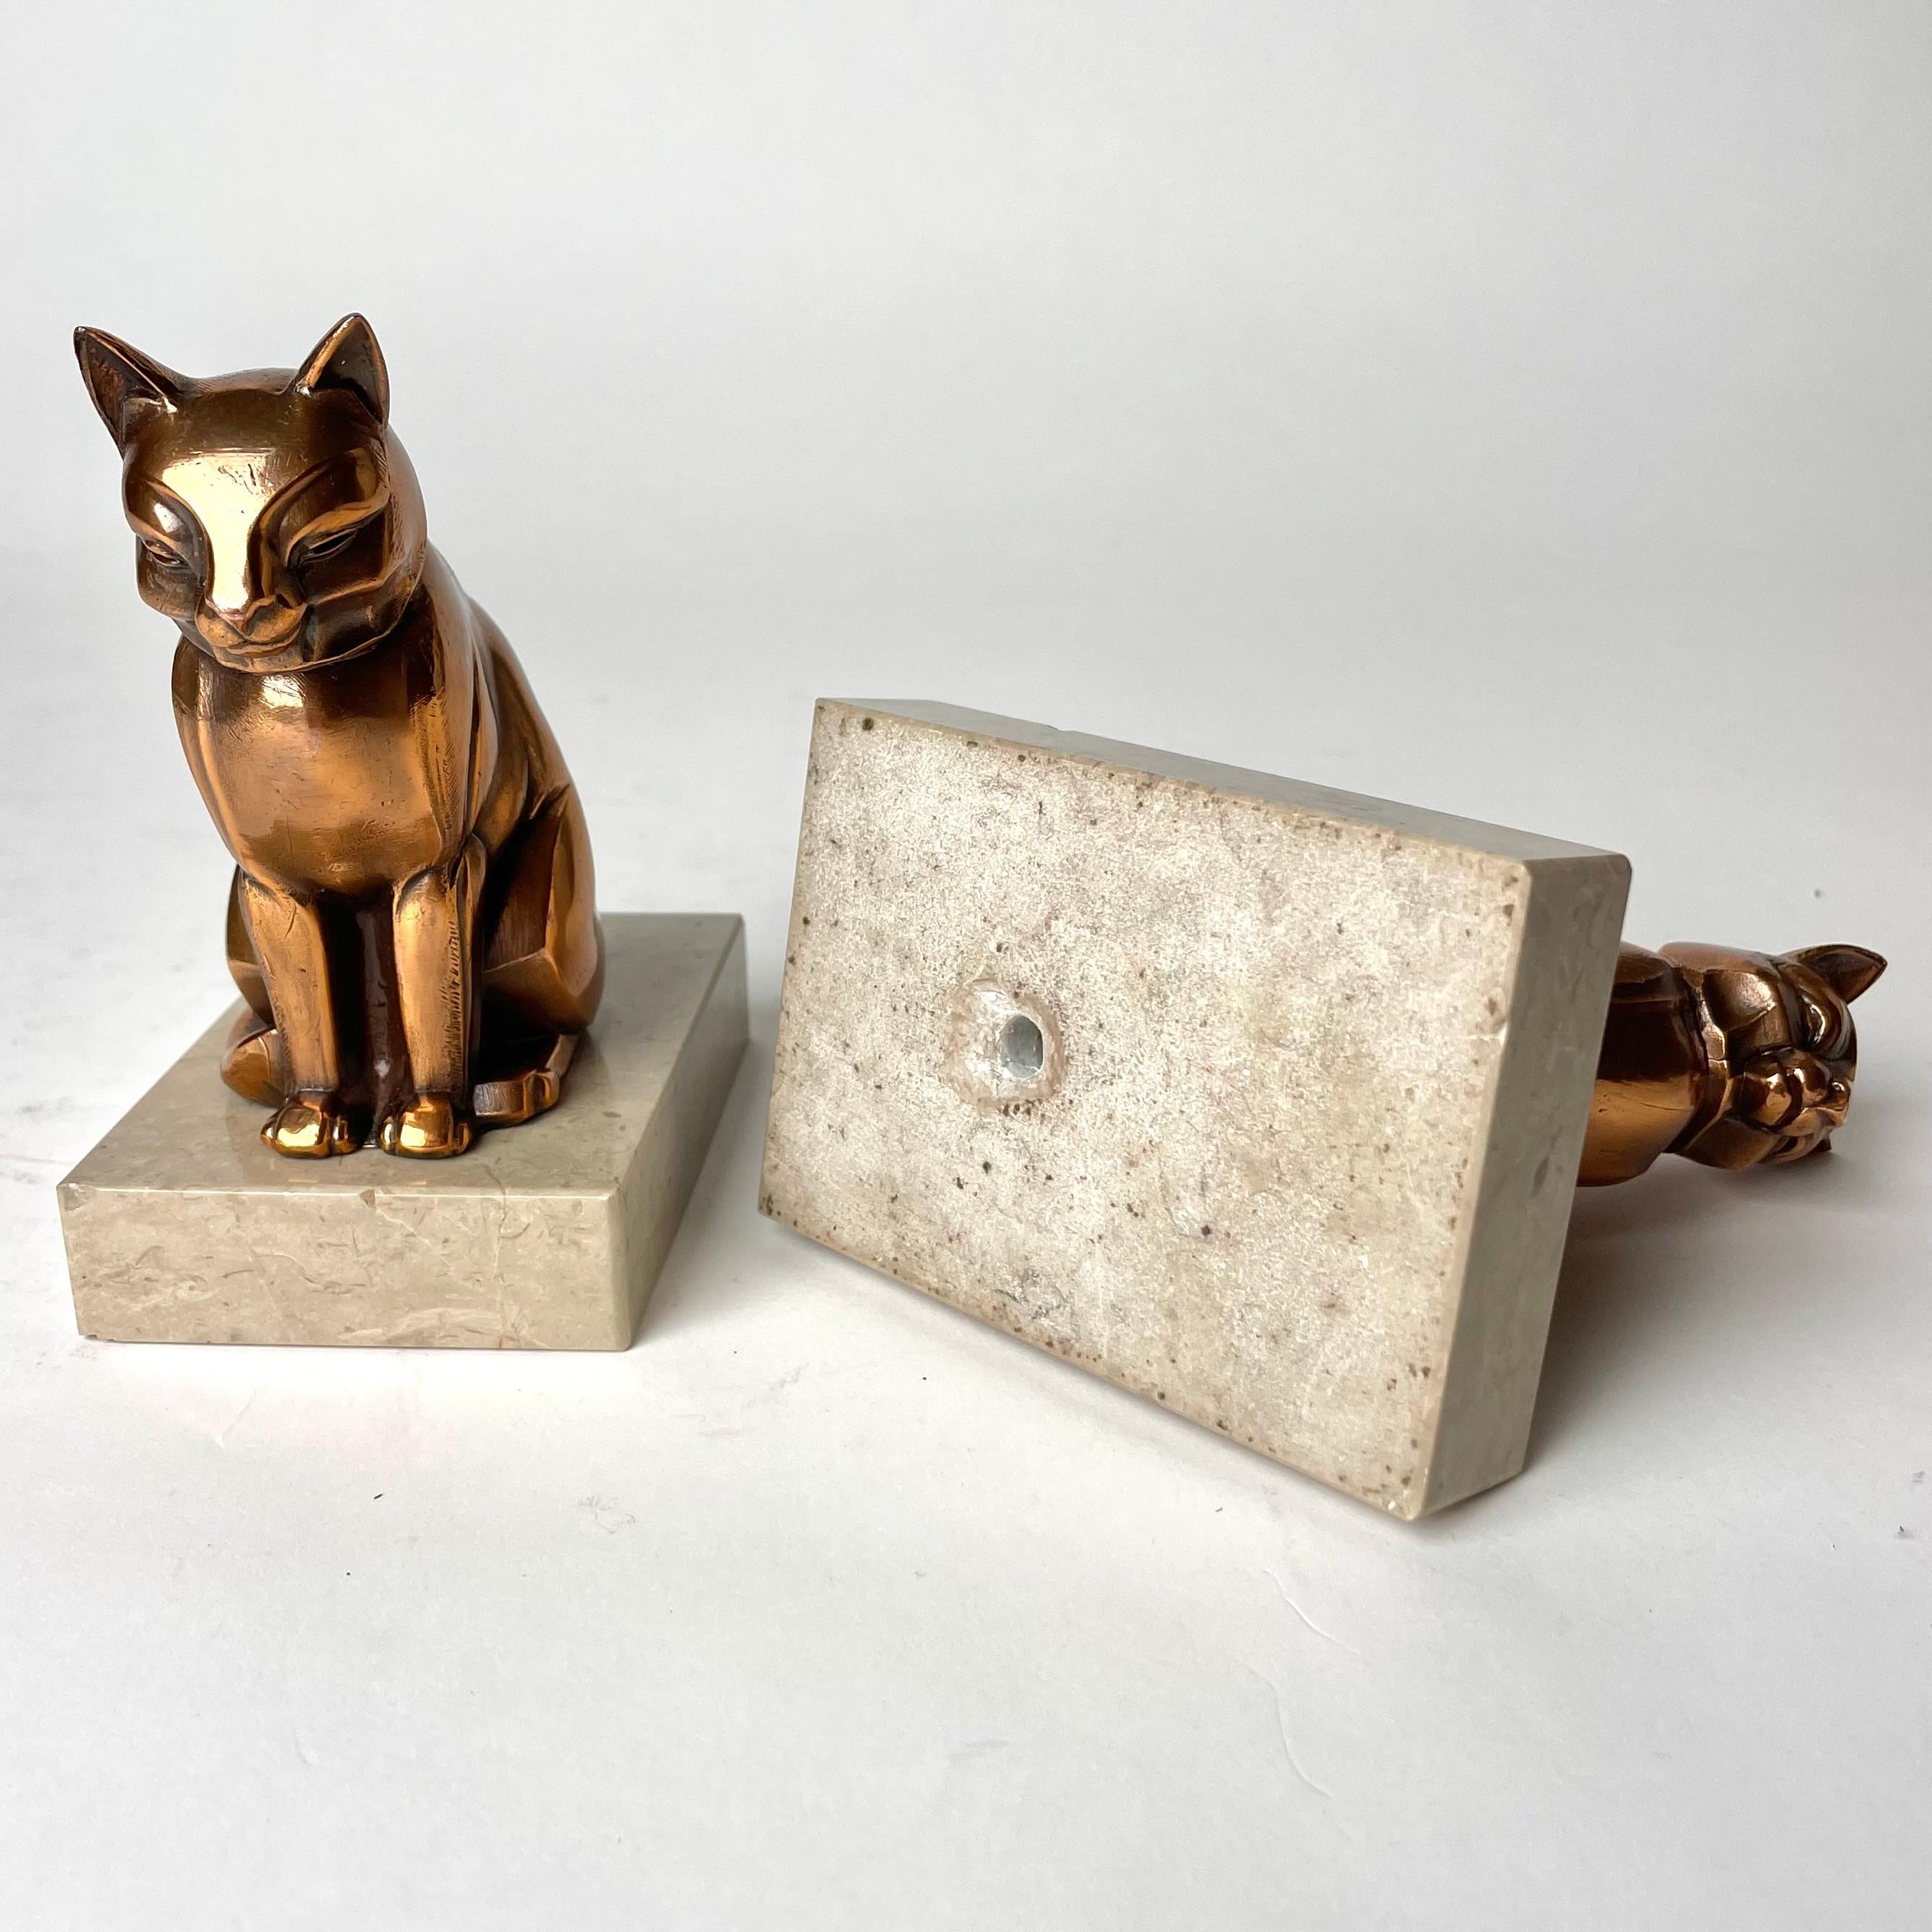 A pair of Cool Art Deco bookends from the 1920s-30s with period-typical cats 3